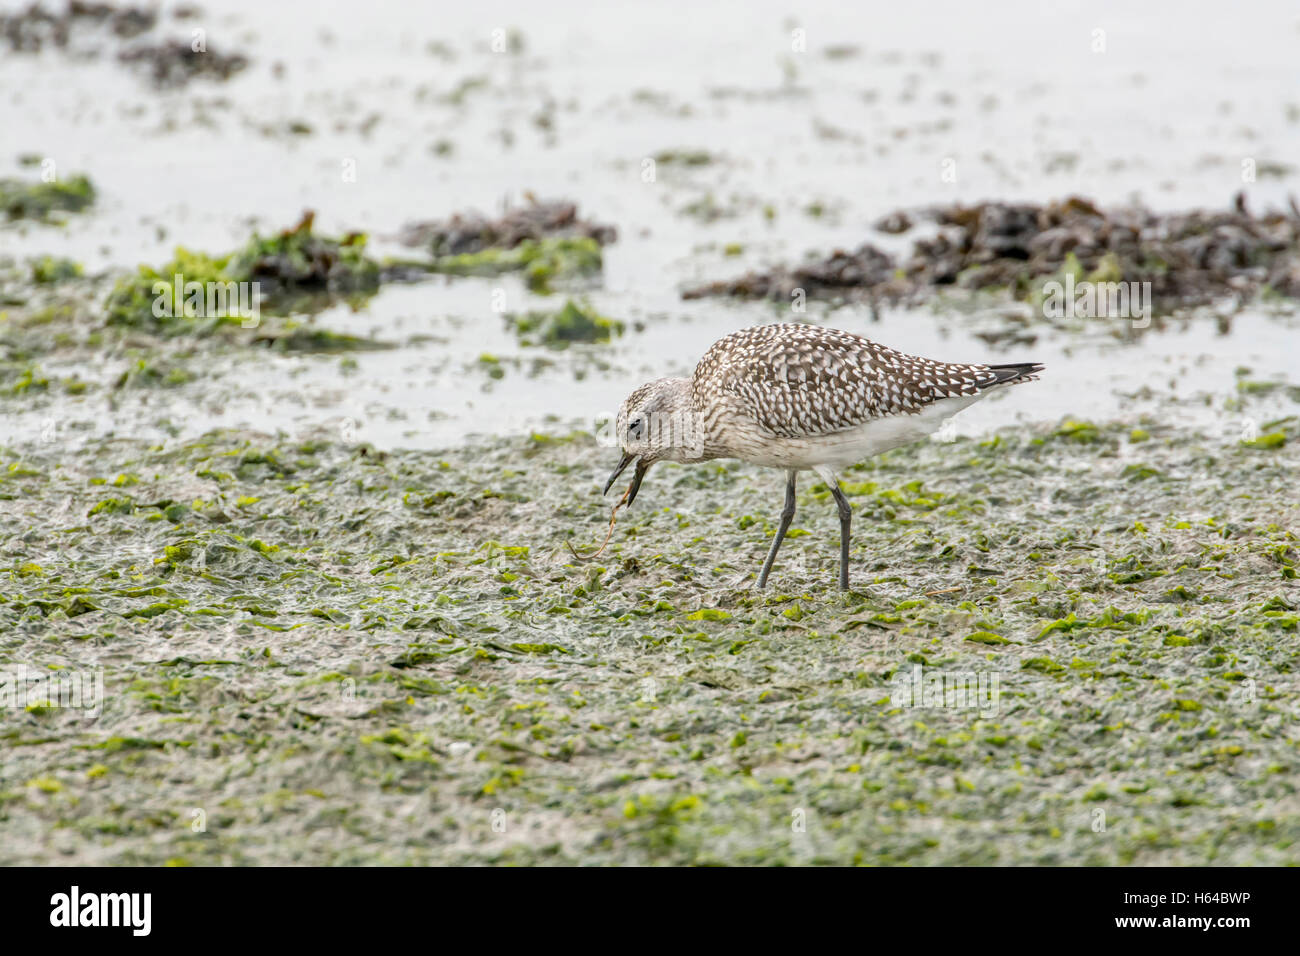 Grey plover (Pluvialis squatarola), in winter plumage, foraging on mudflats. The bird is eating a marine worm Stock Photo